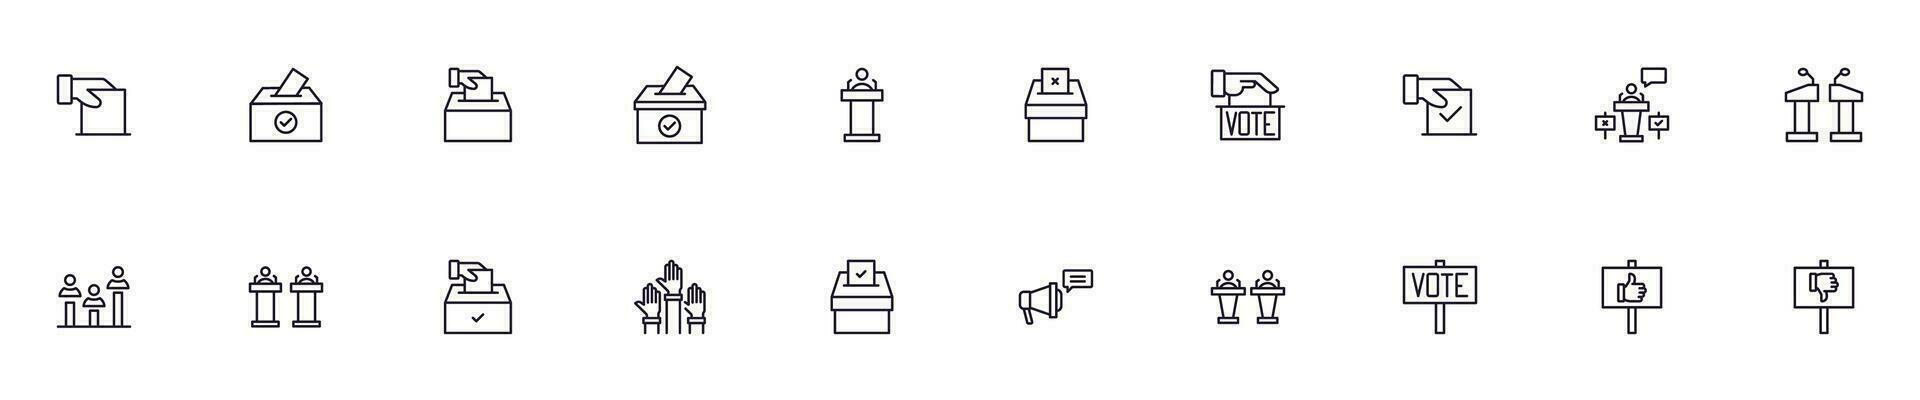 Collection of modern election outline icons. Set of modern illustrations for mobile apps, web sites, flyers, banners etc isolated on white background. Premium quality signs. vector